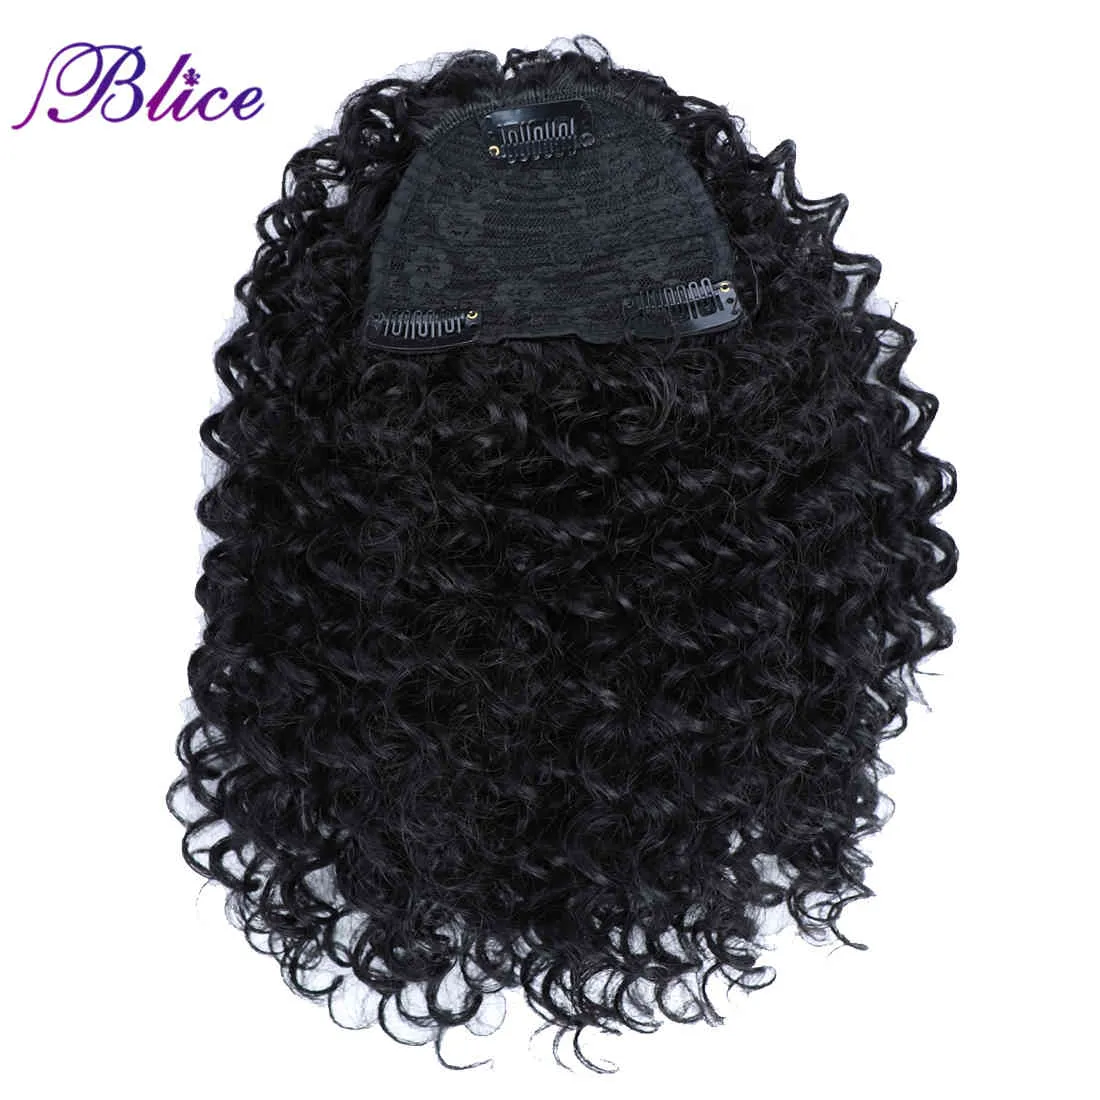 Blice Synthetic Bangs With Clips Side Part Bouncy Curls Natural Bang Long Curly Hair Extension Pieces For Women